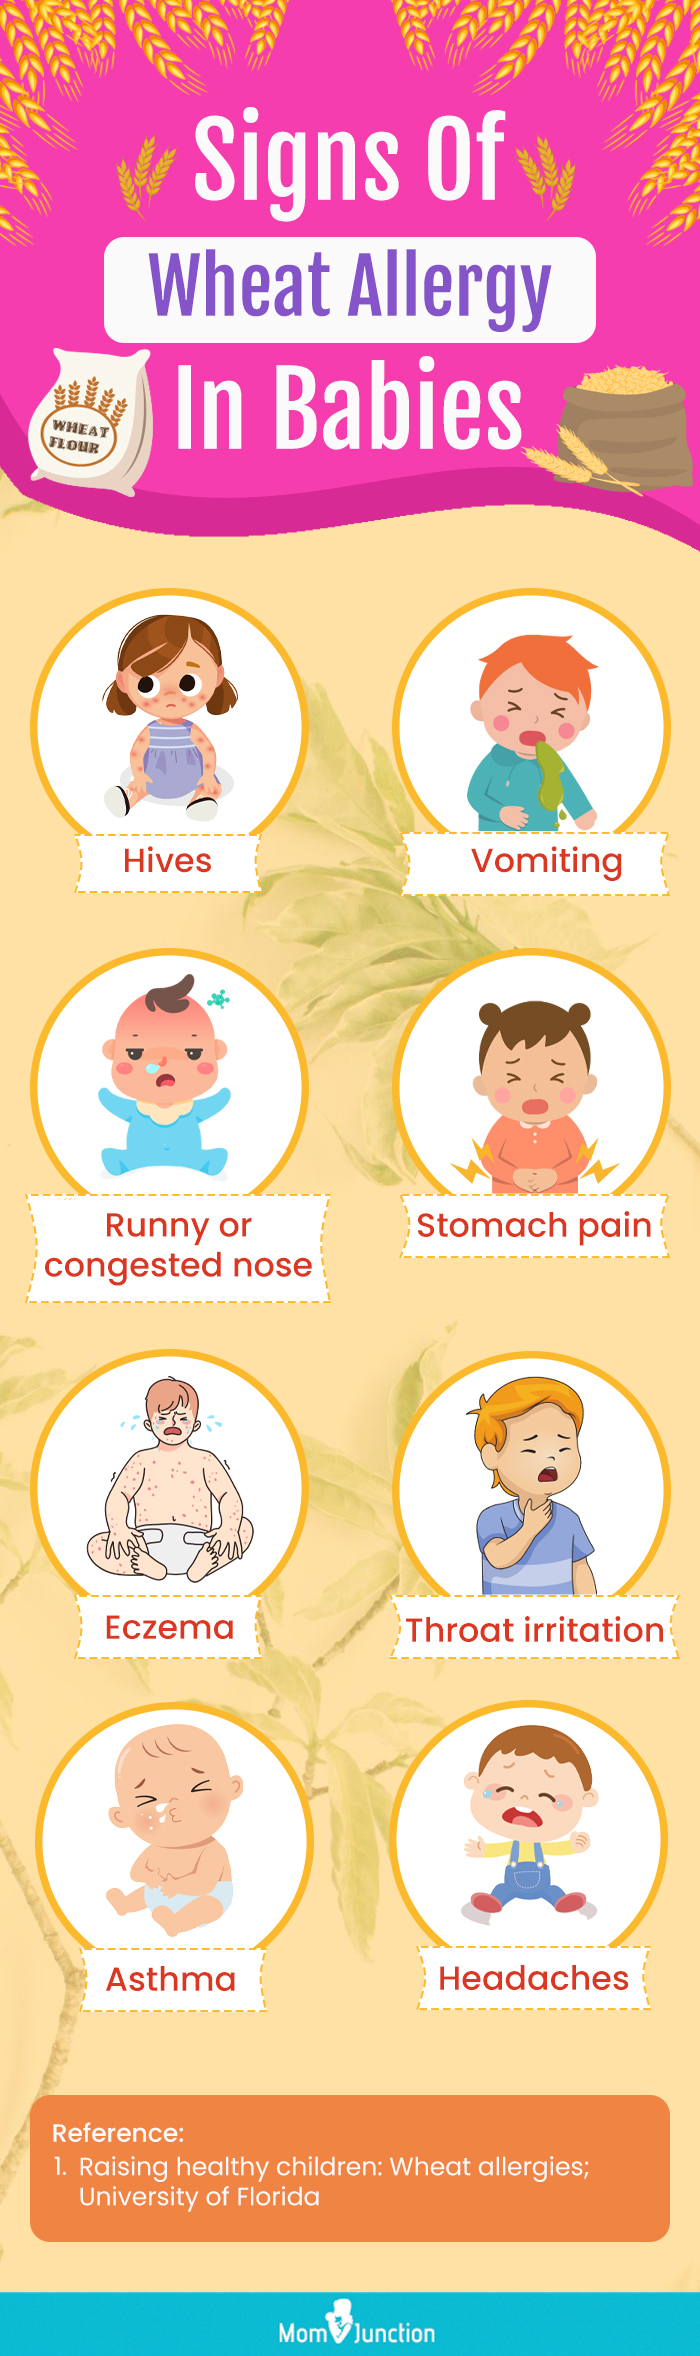 signs of wheat allergy in babies (infographic)